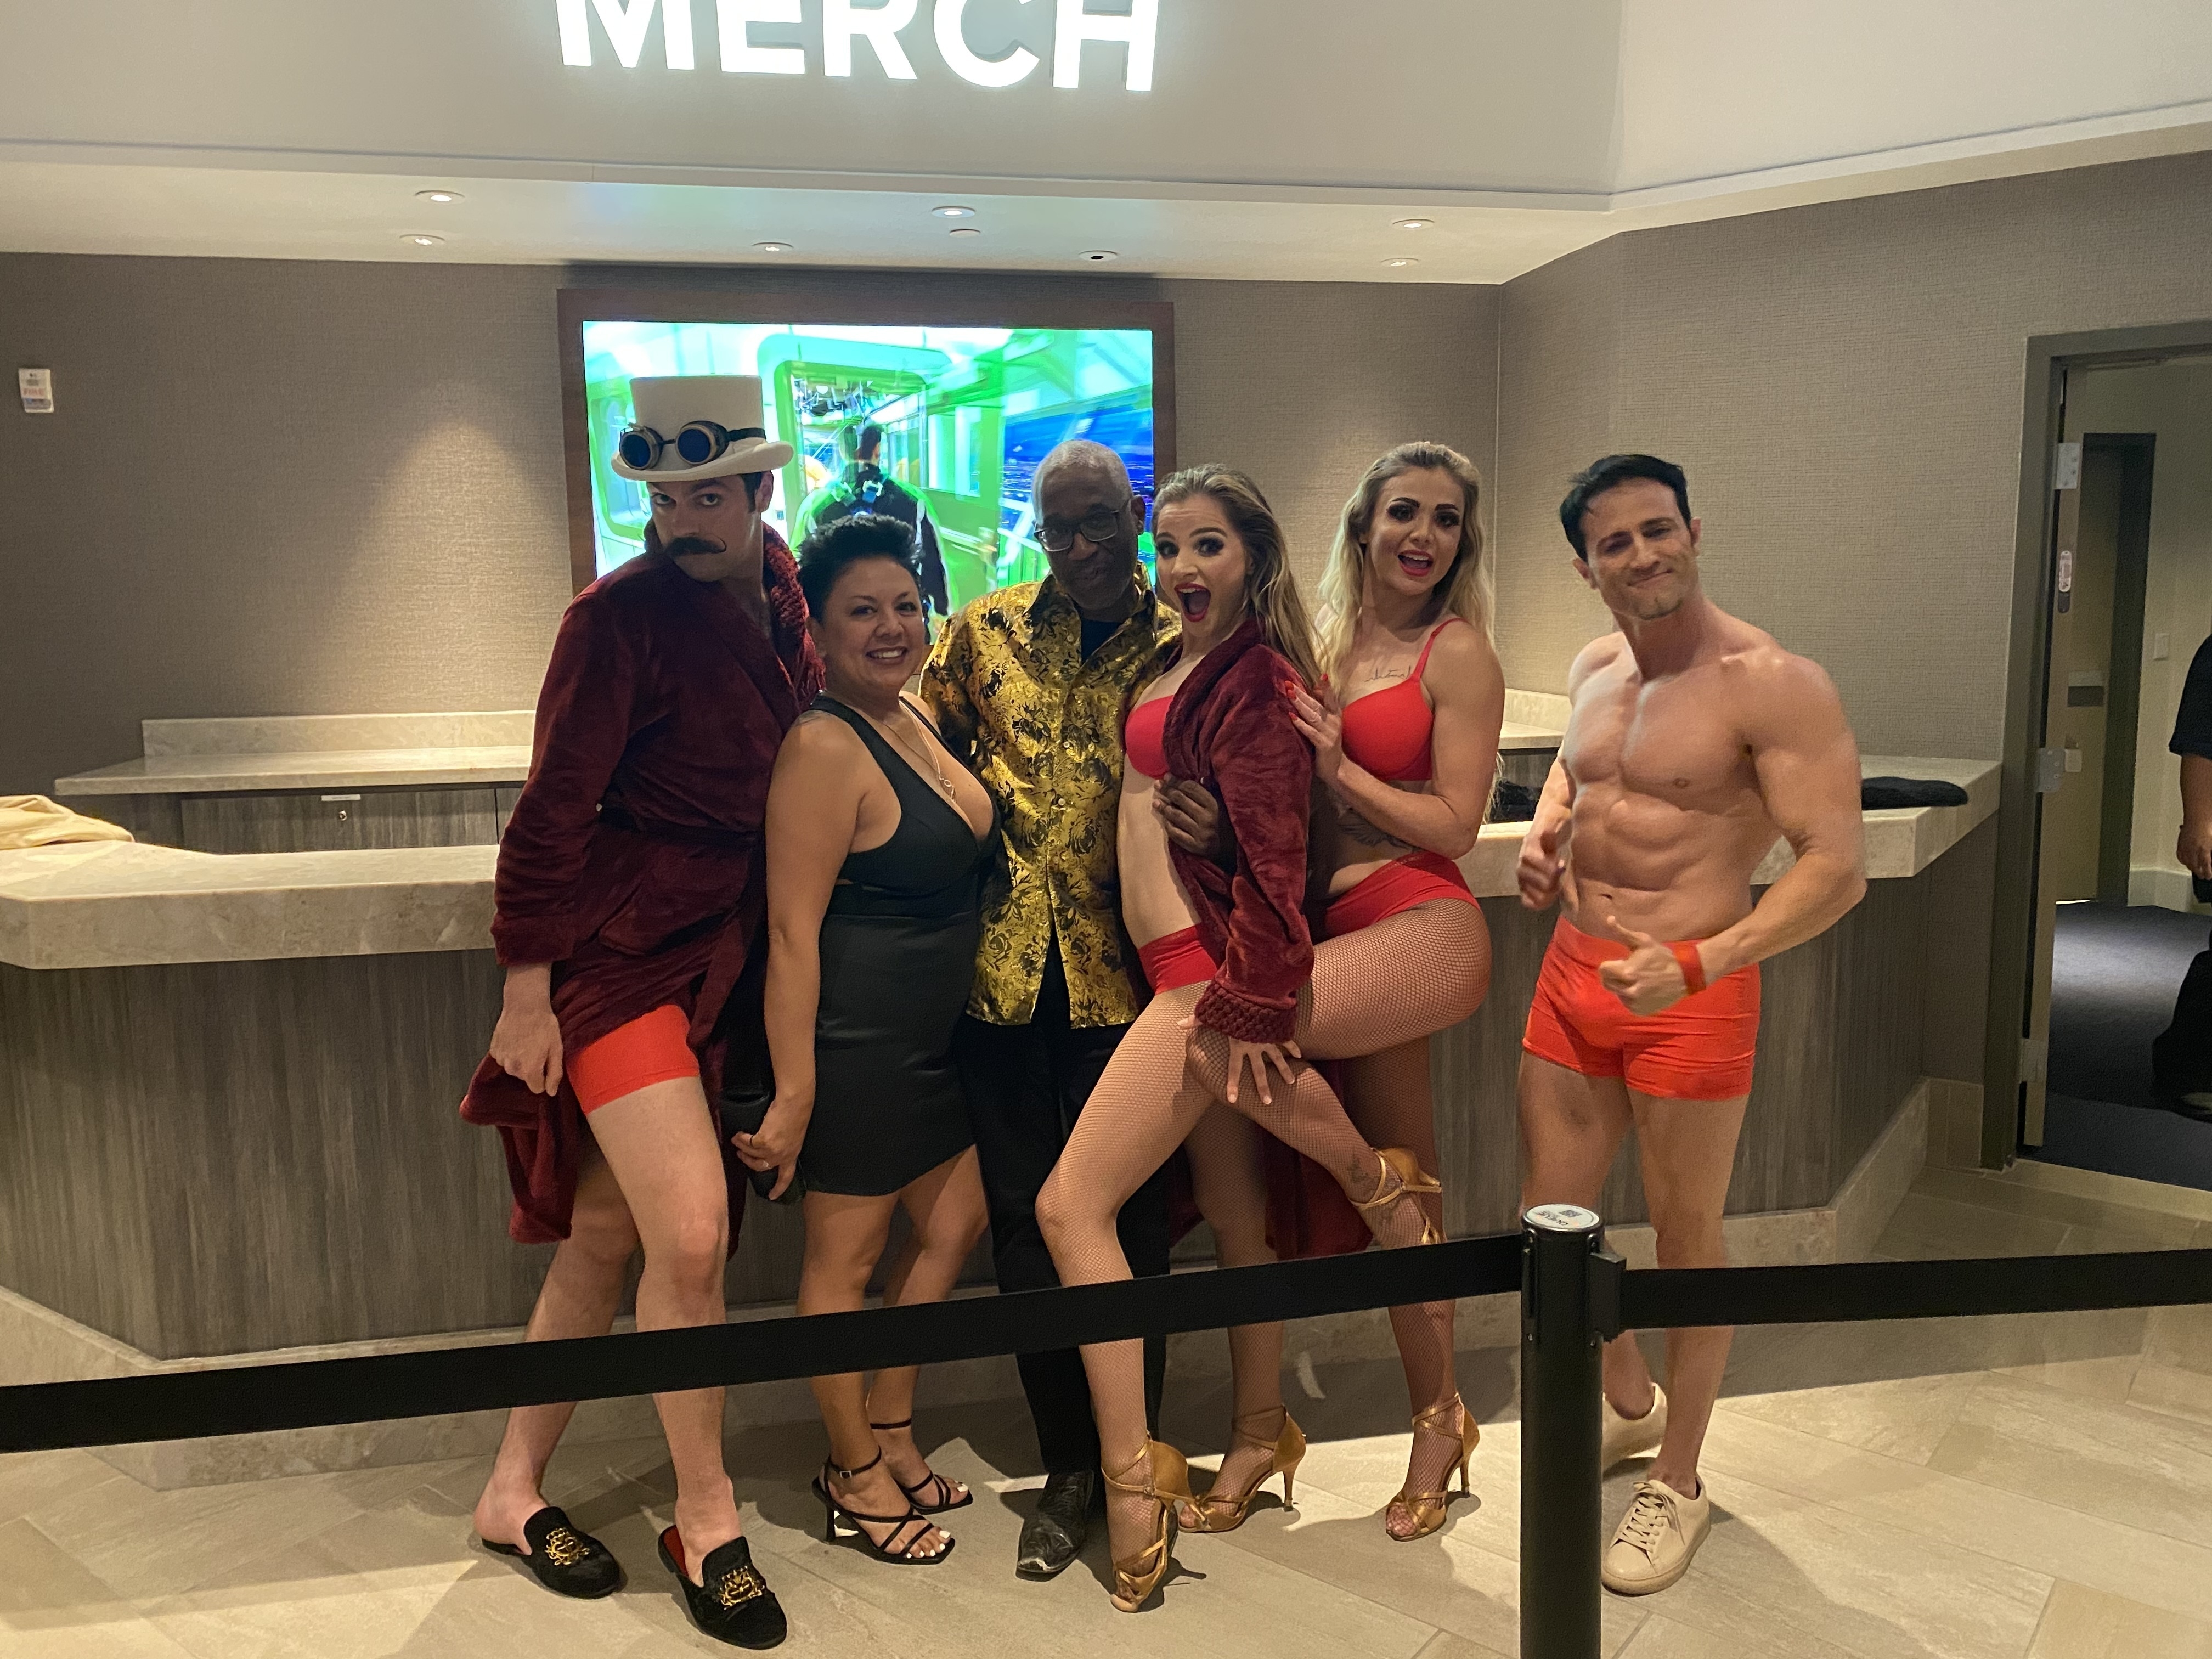 Rouge: The Sexiest Show in Vegas at the STRAT Hotel and Casino 2023 - Las  Vegas